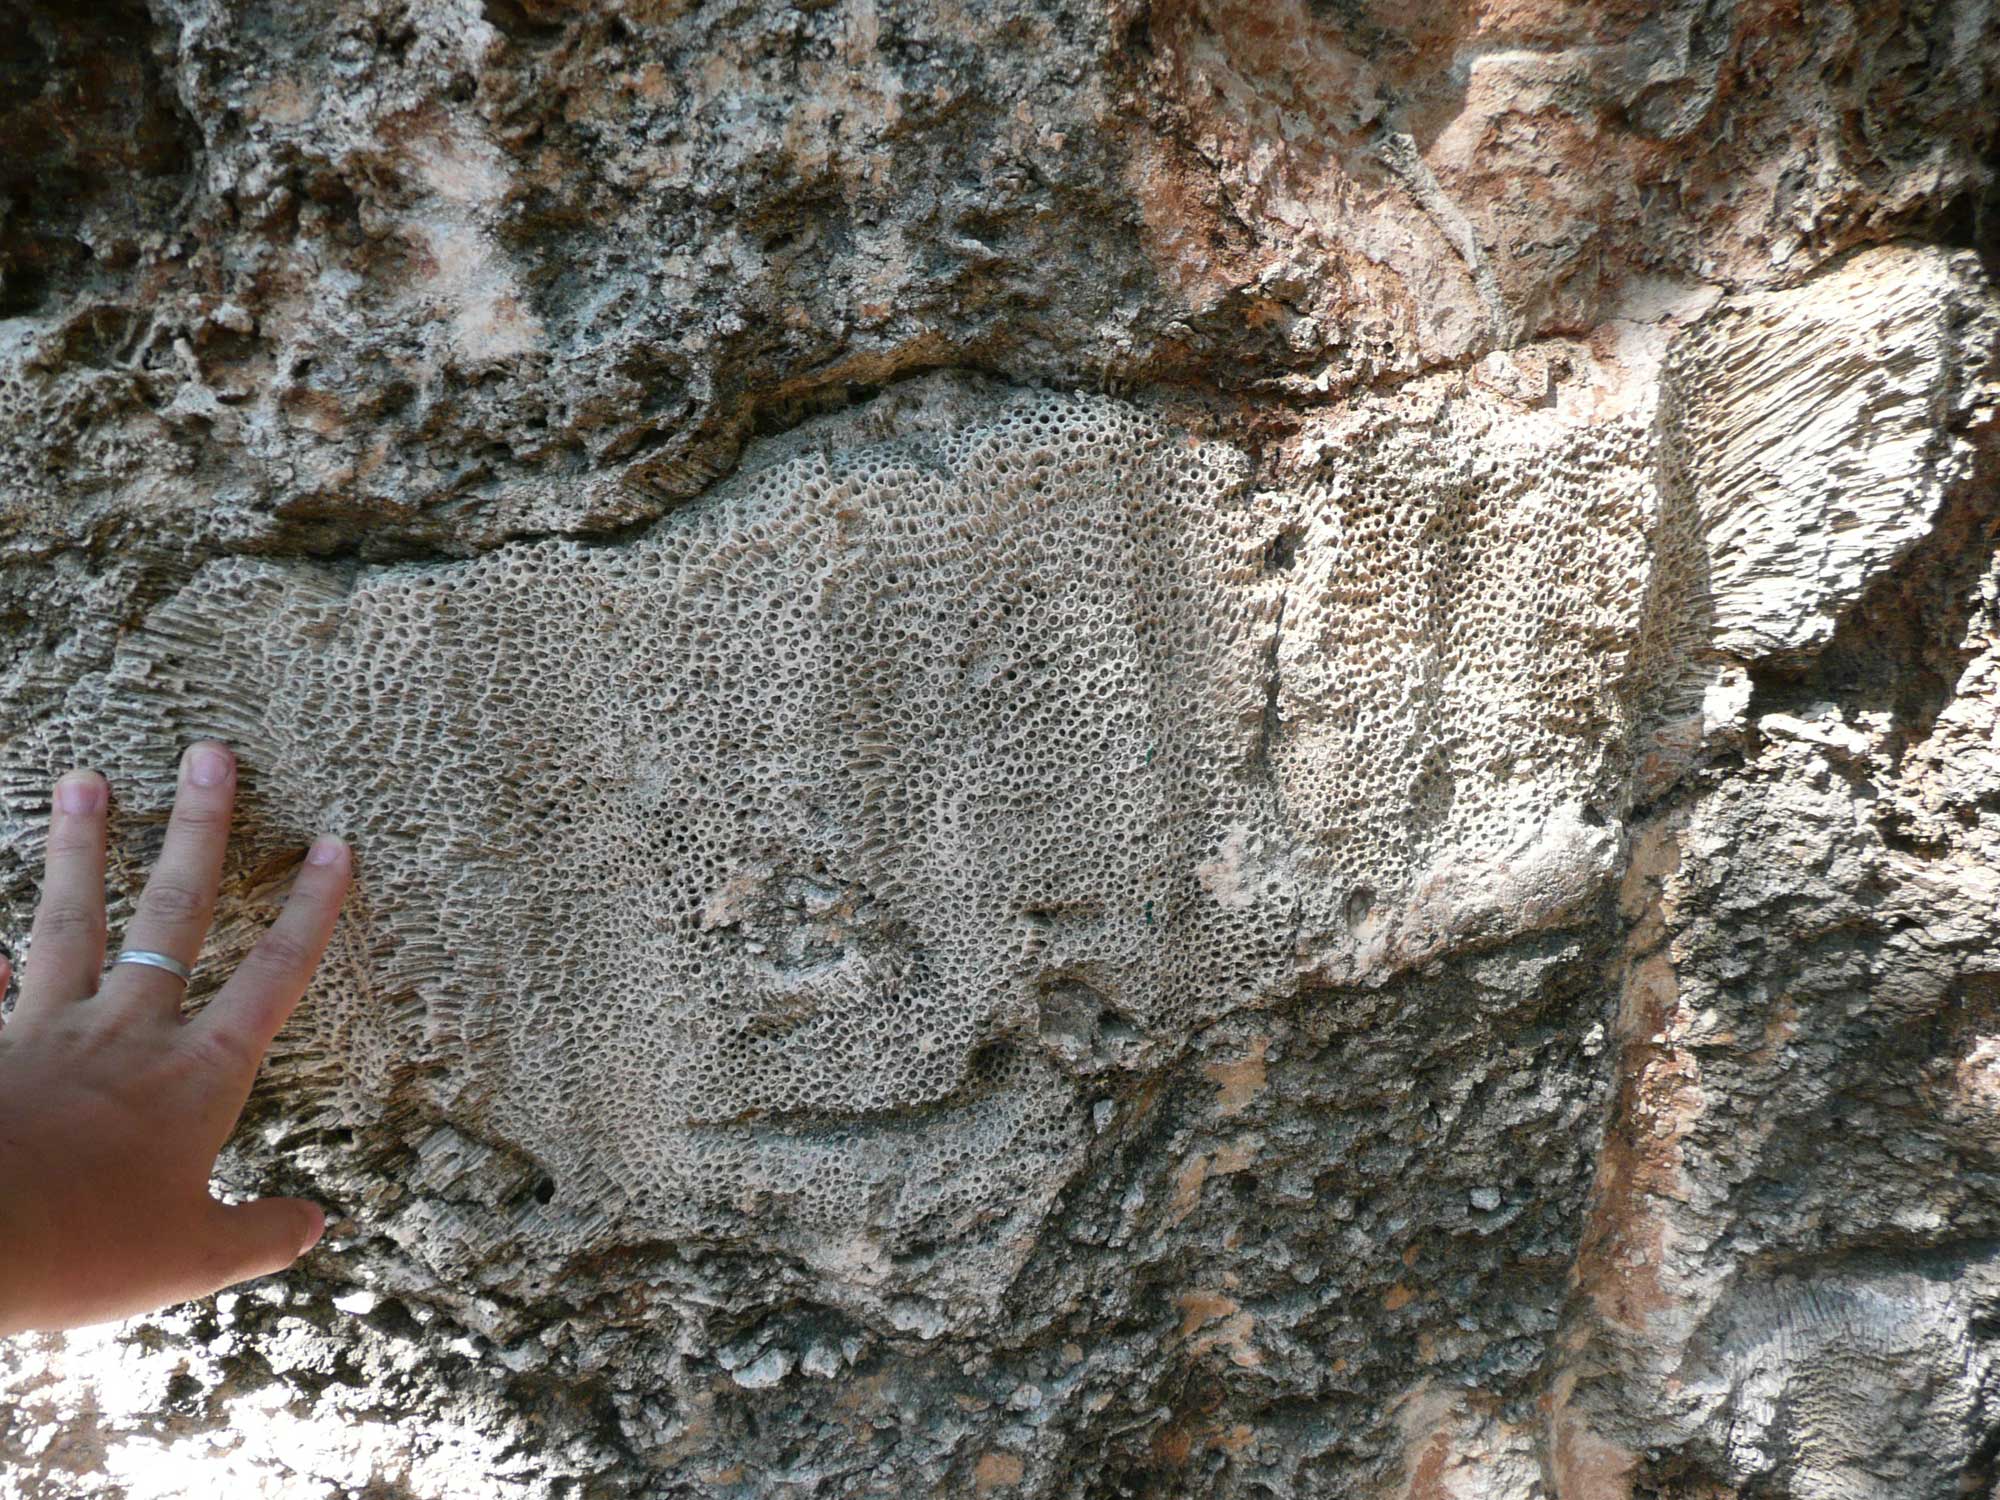 Photograph of a large piece of coral embedded in limestone in the Pleistocene of the Florida Keys. A person's hand gives a sense of scale.